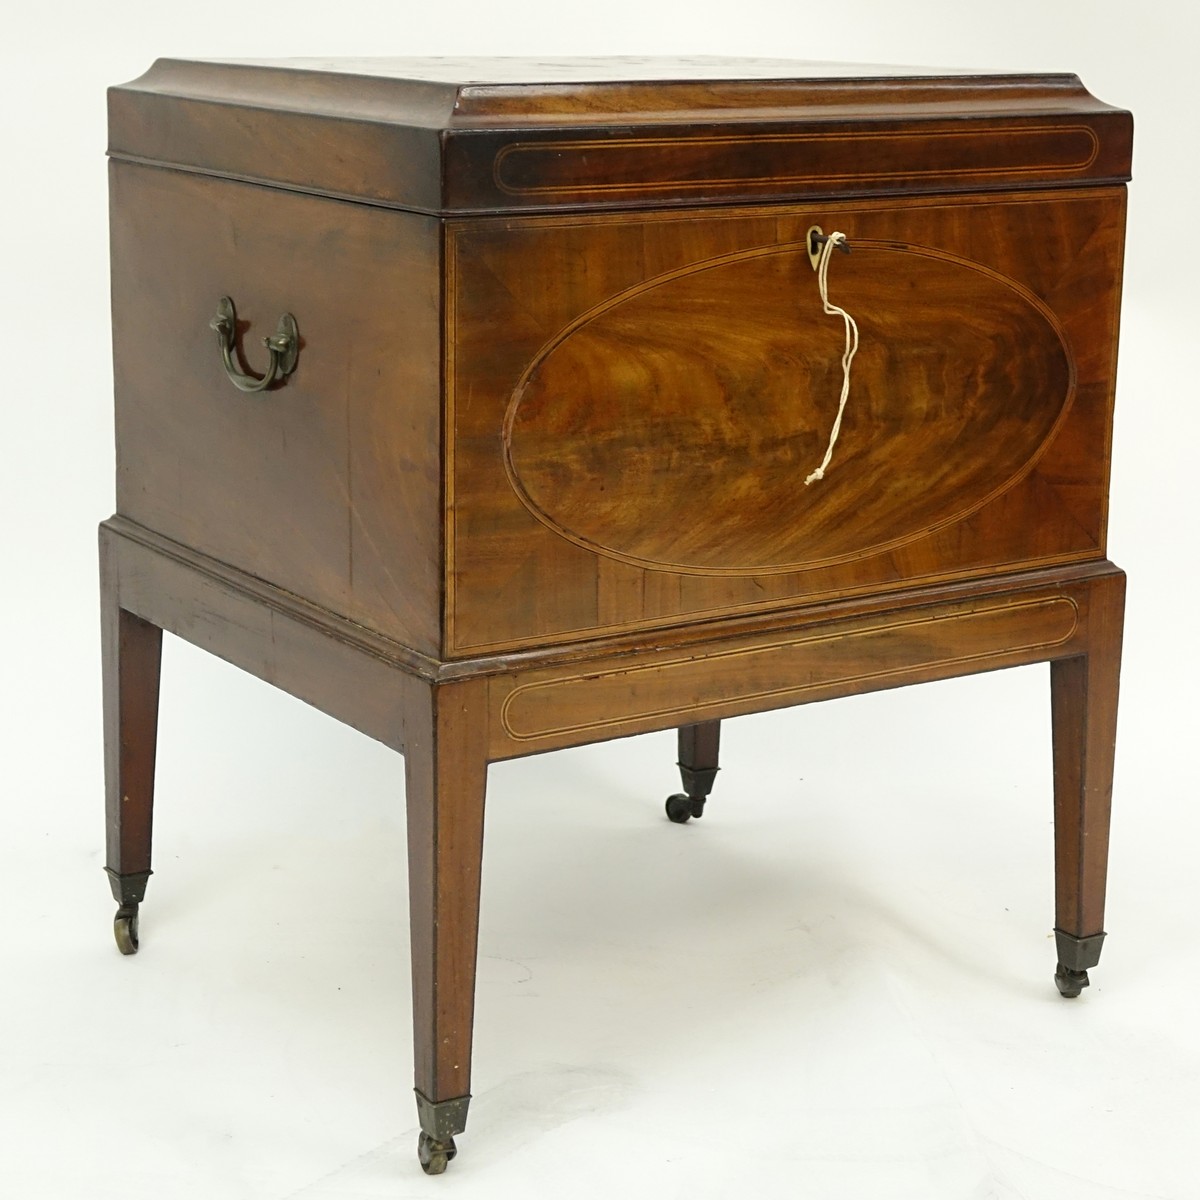 English George III Flame Mahogany Inlaid Cellarette on Casters. Lined interior, stands on squared tapering legs, key included.